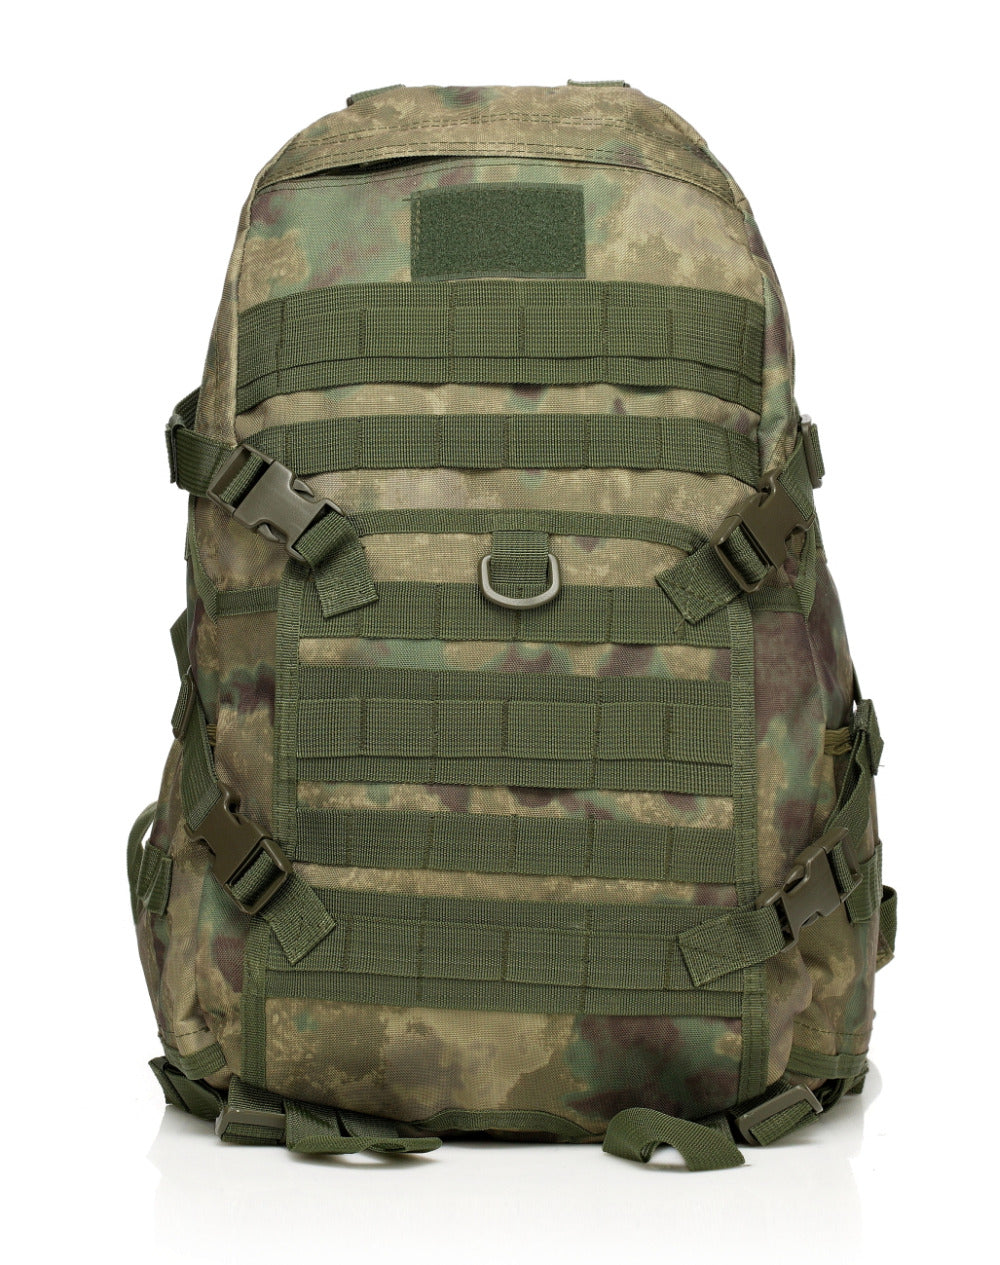 Tactical Military Molle Backpack - Bearded Lion